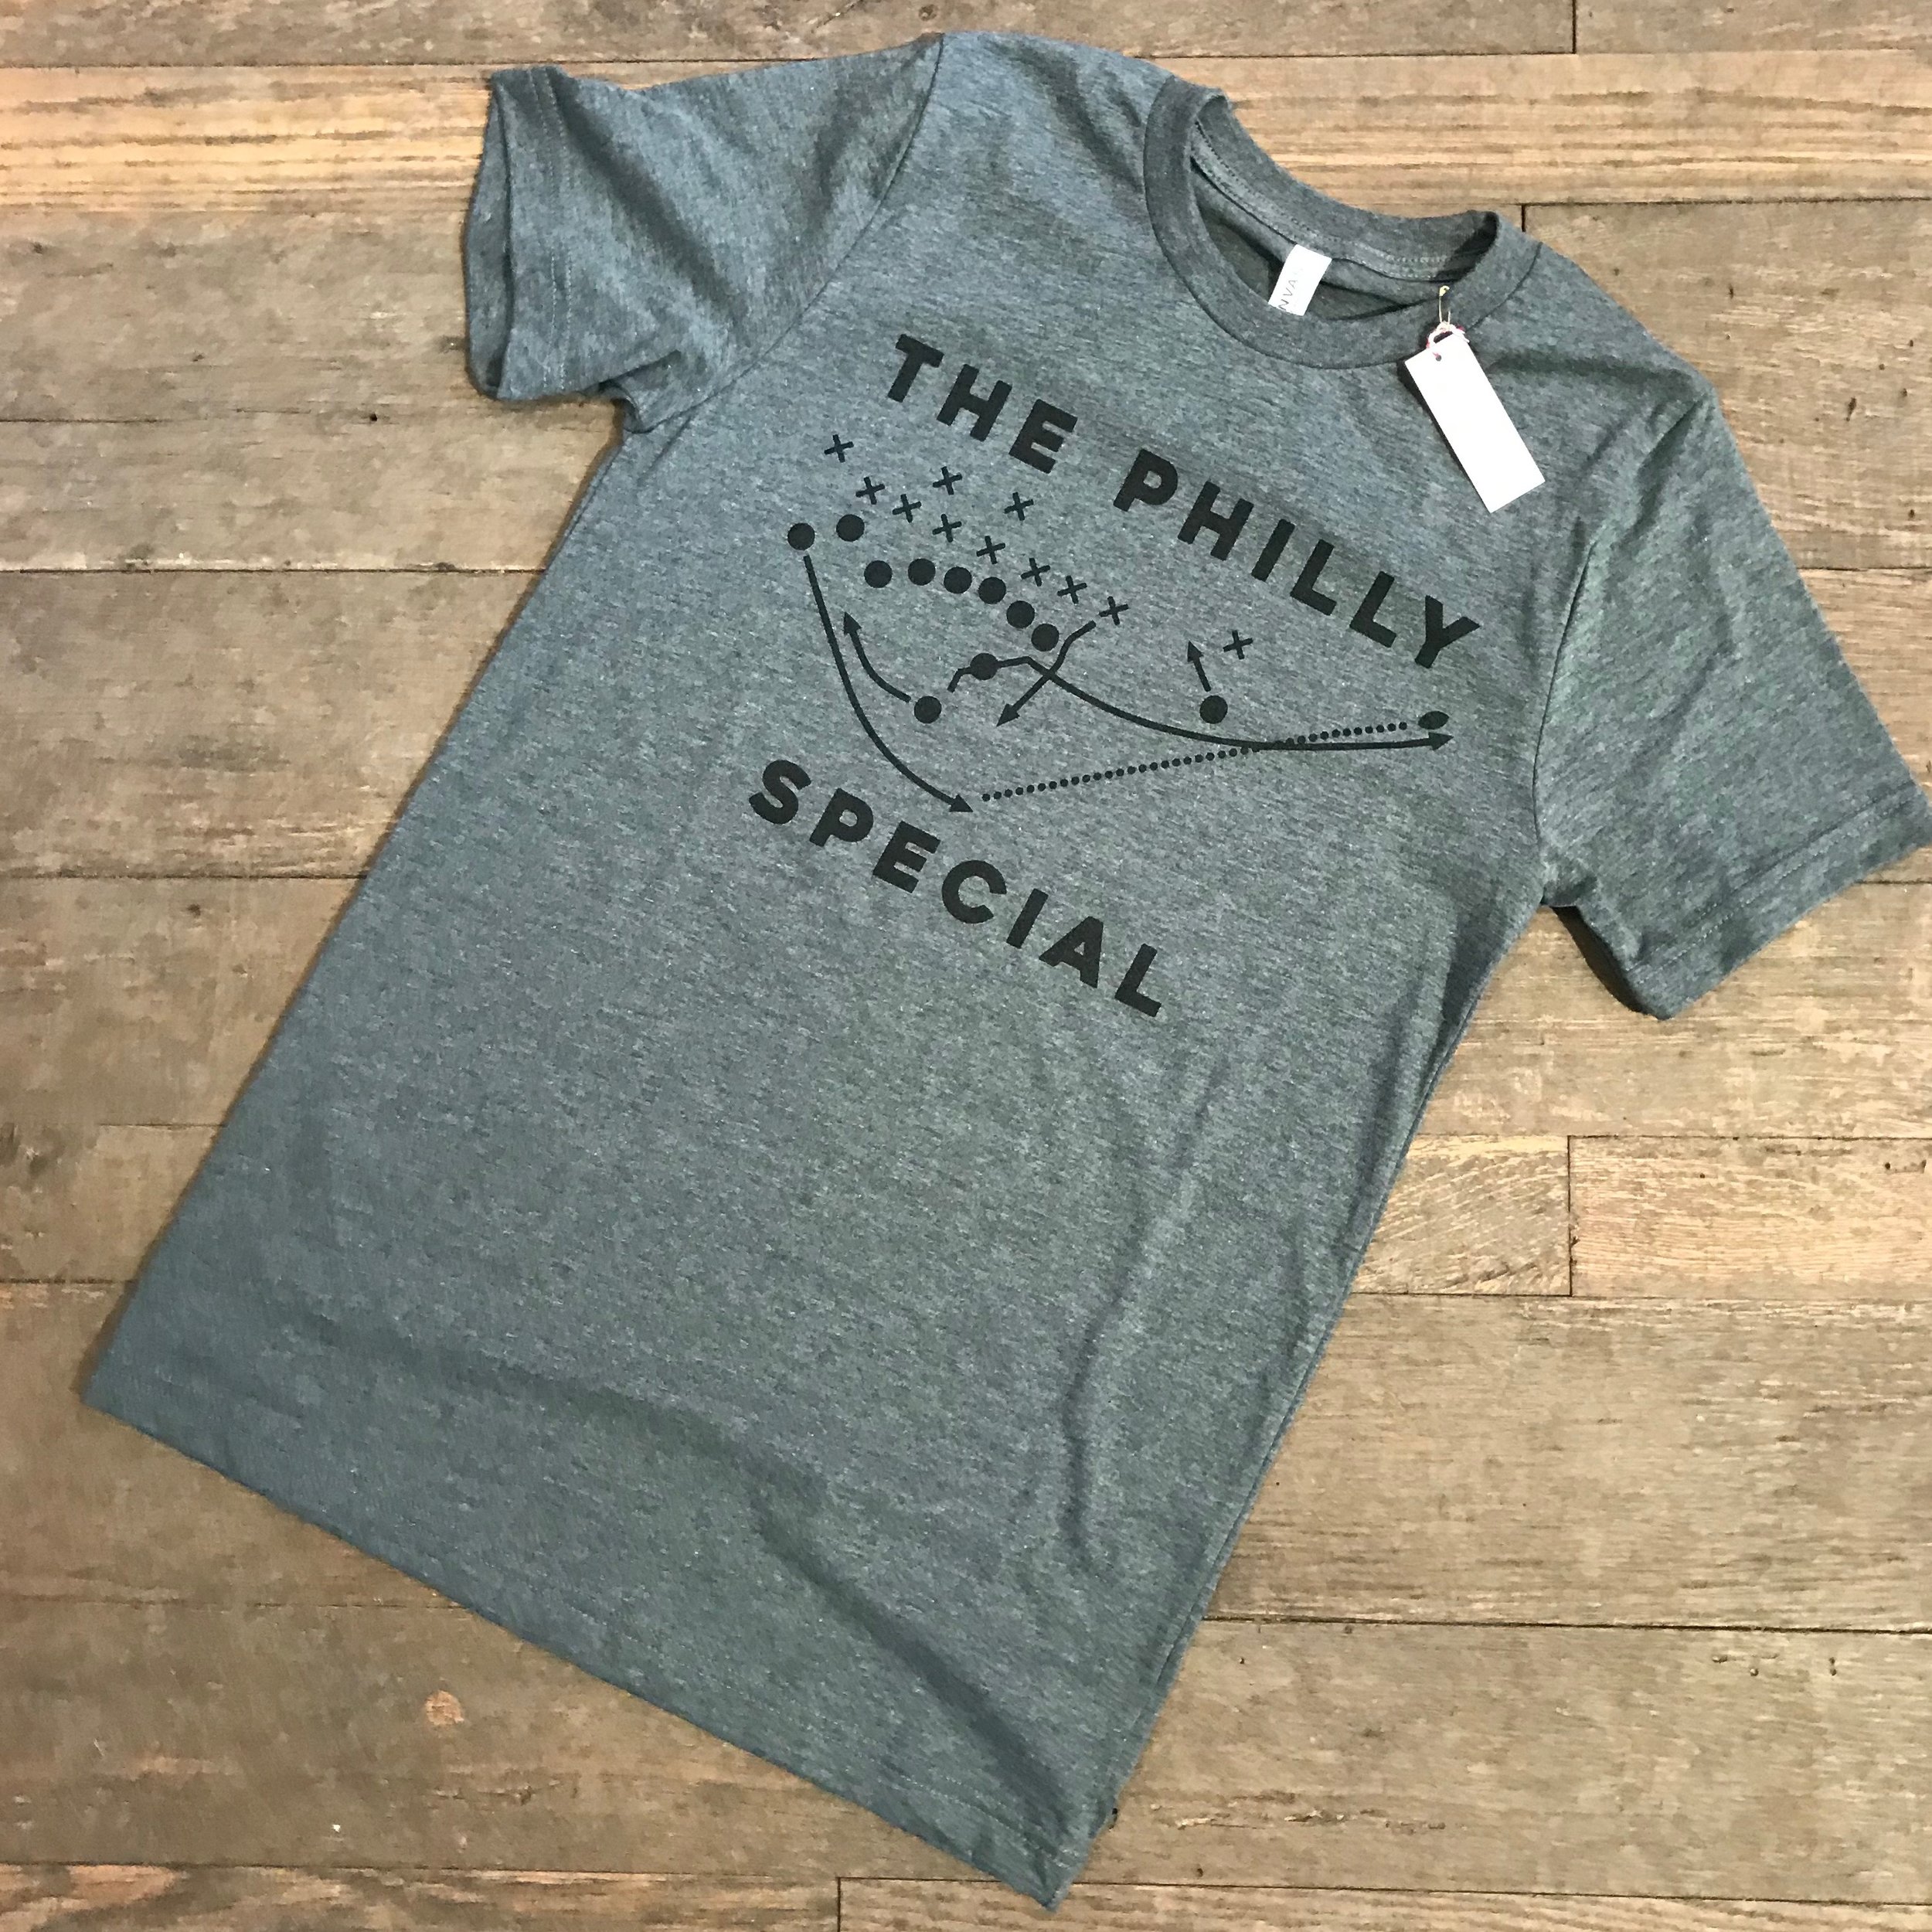 philly t shirt company